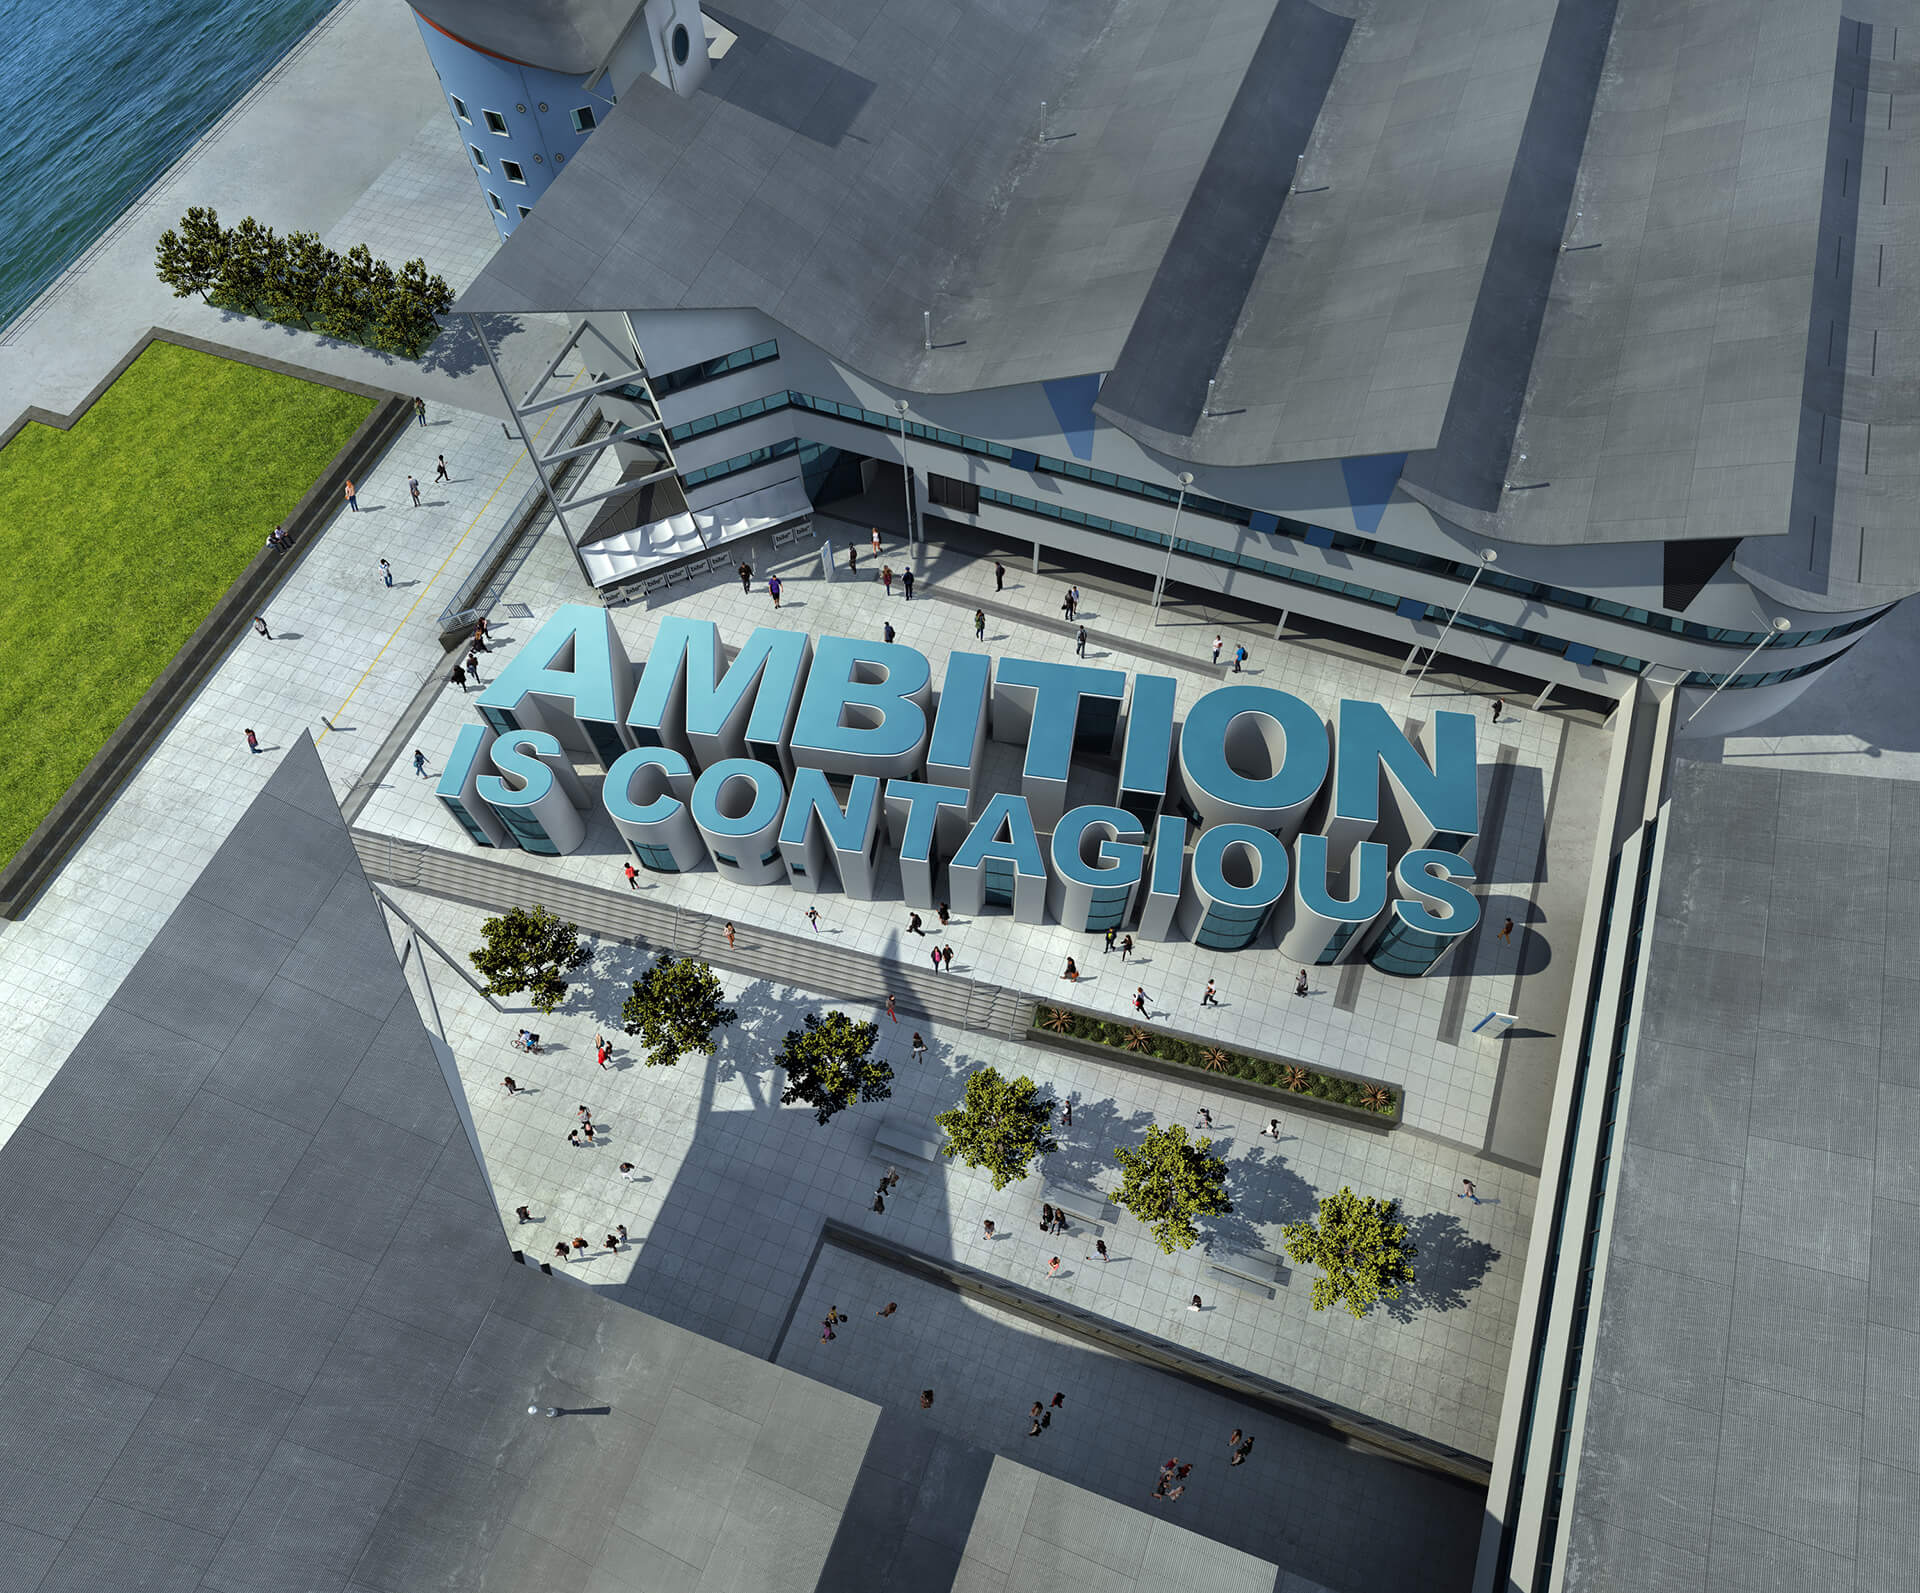 3d text created as a building and built to look like the text 3d model fits seamlessly into a university campus aerial 3d view